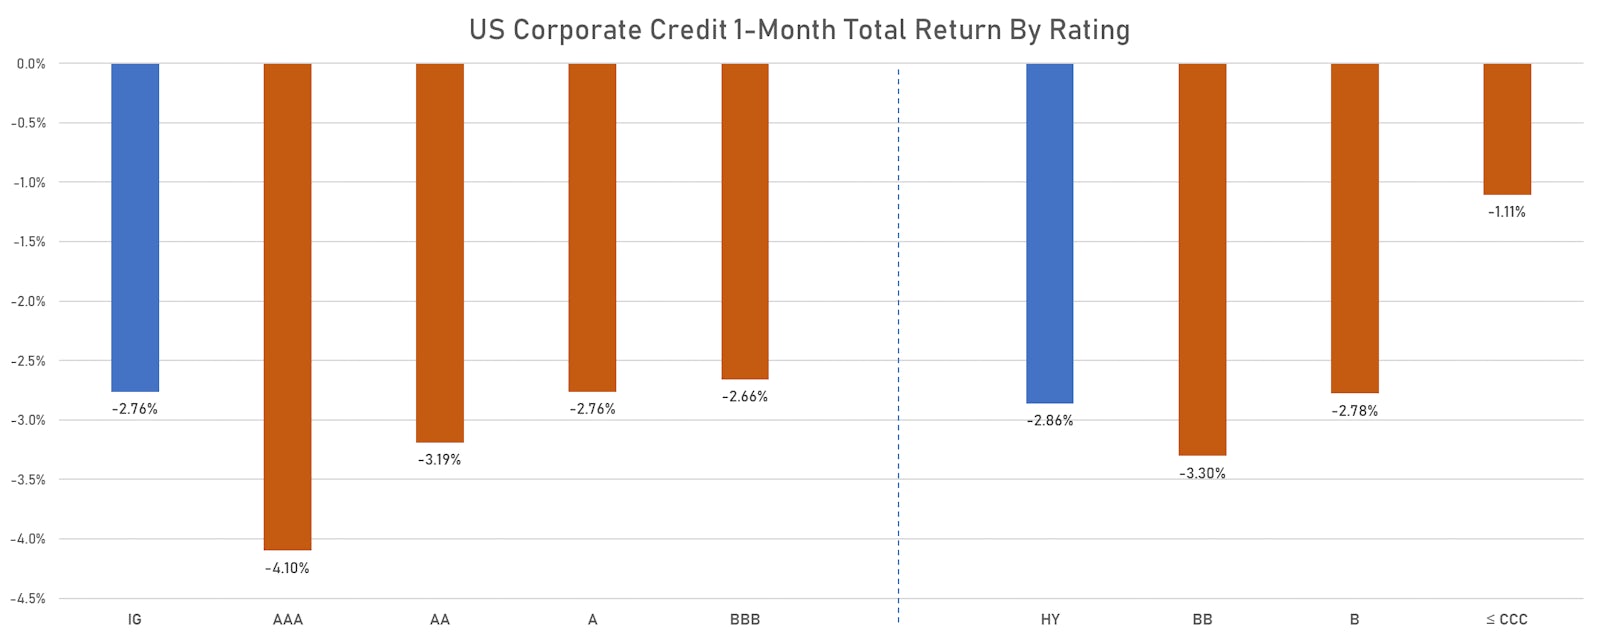 ICE BofAML US Corporate Credit 1-Month Total Returns By Rating | Sources: ϕpost, FactSet data